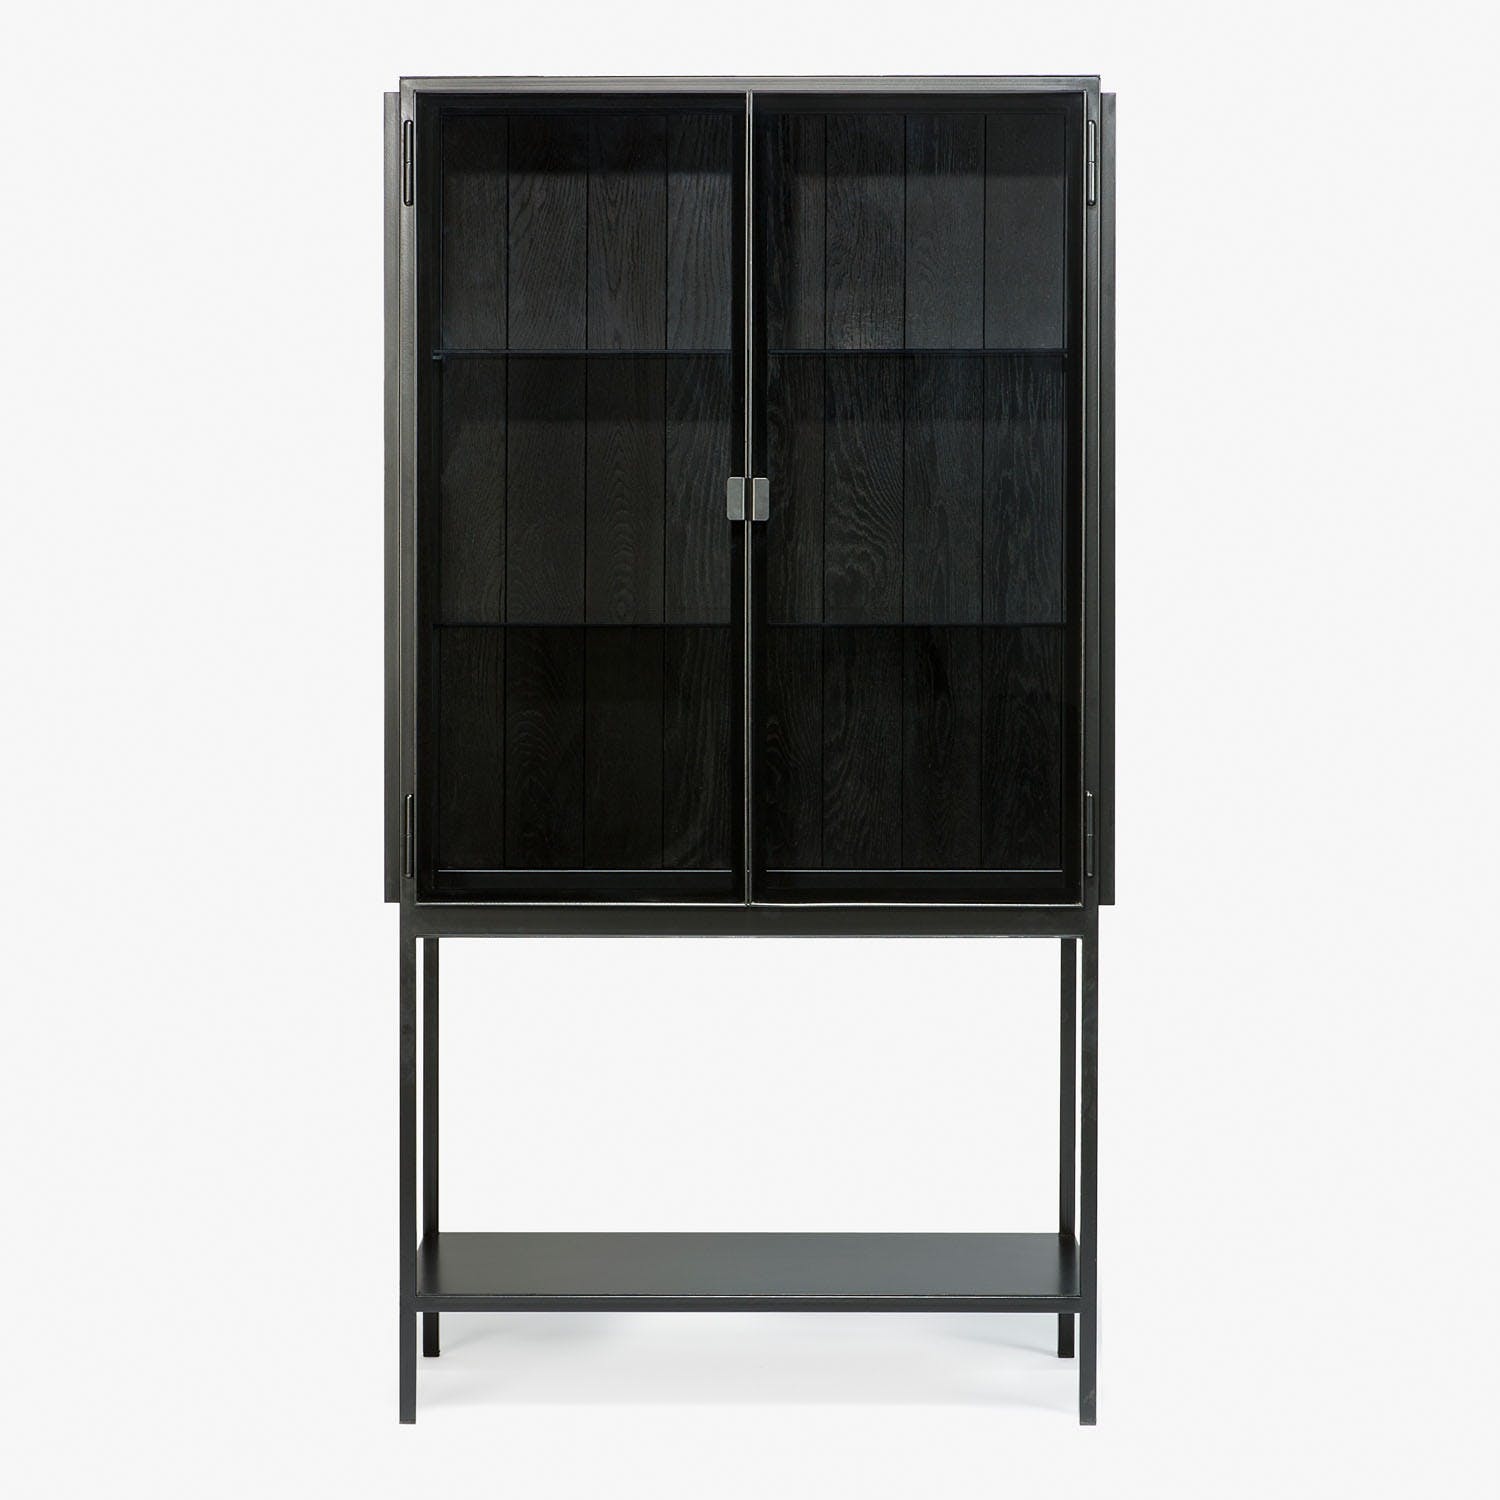 Minimalistic black cabinet with glass doors and sleek metal frame.